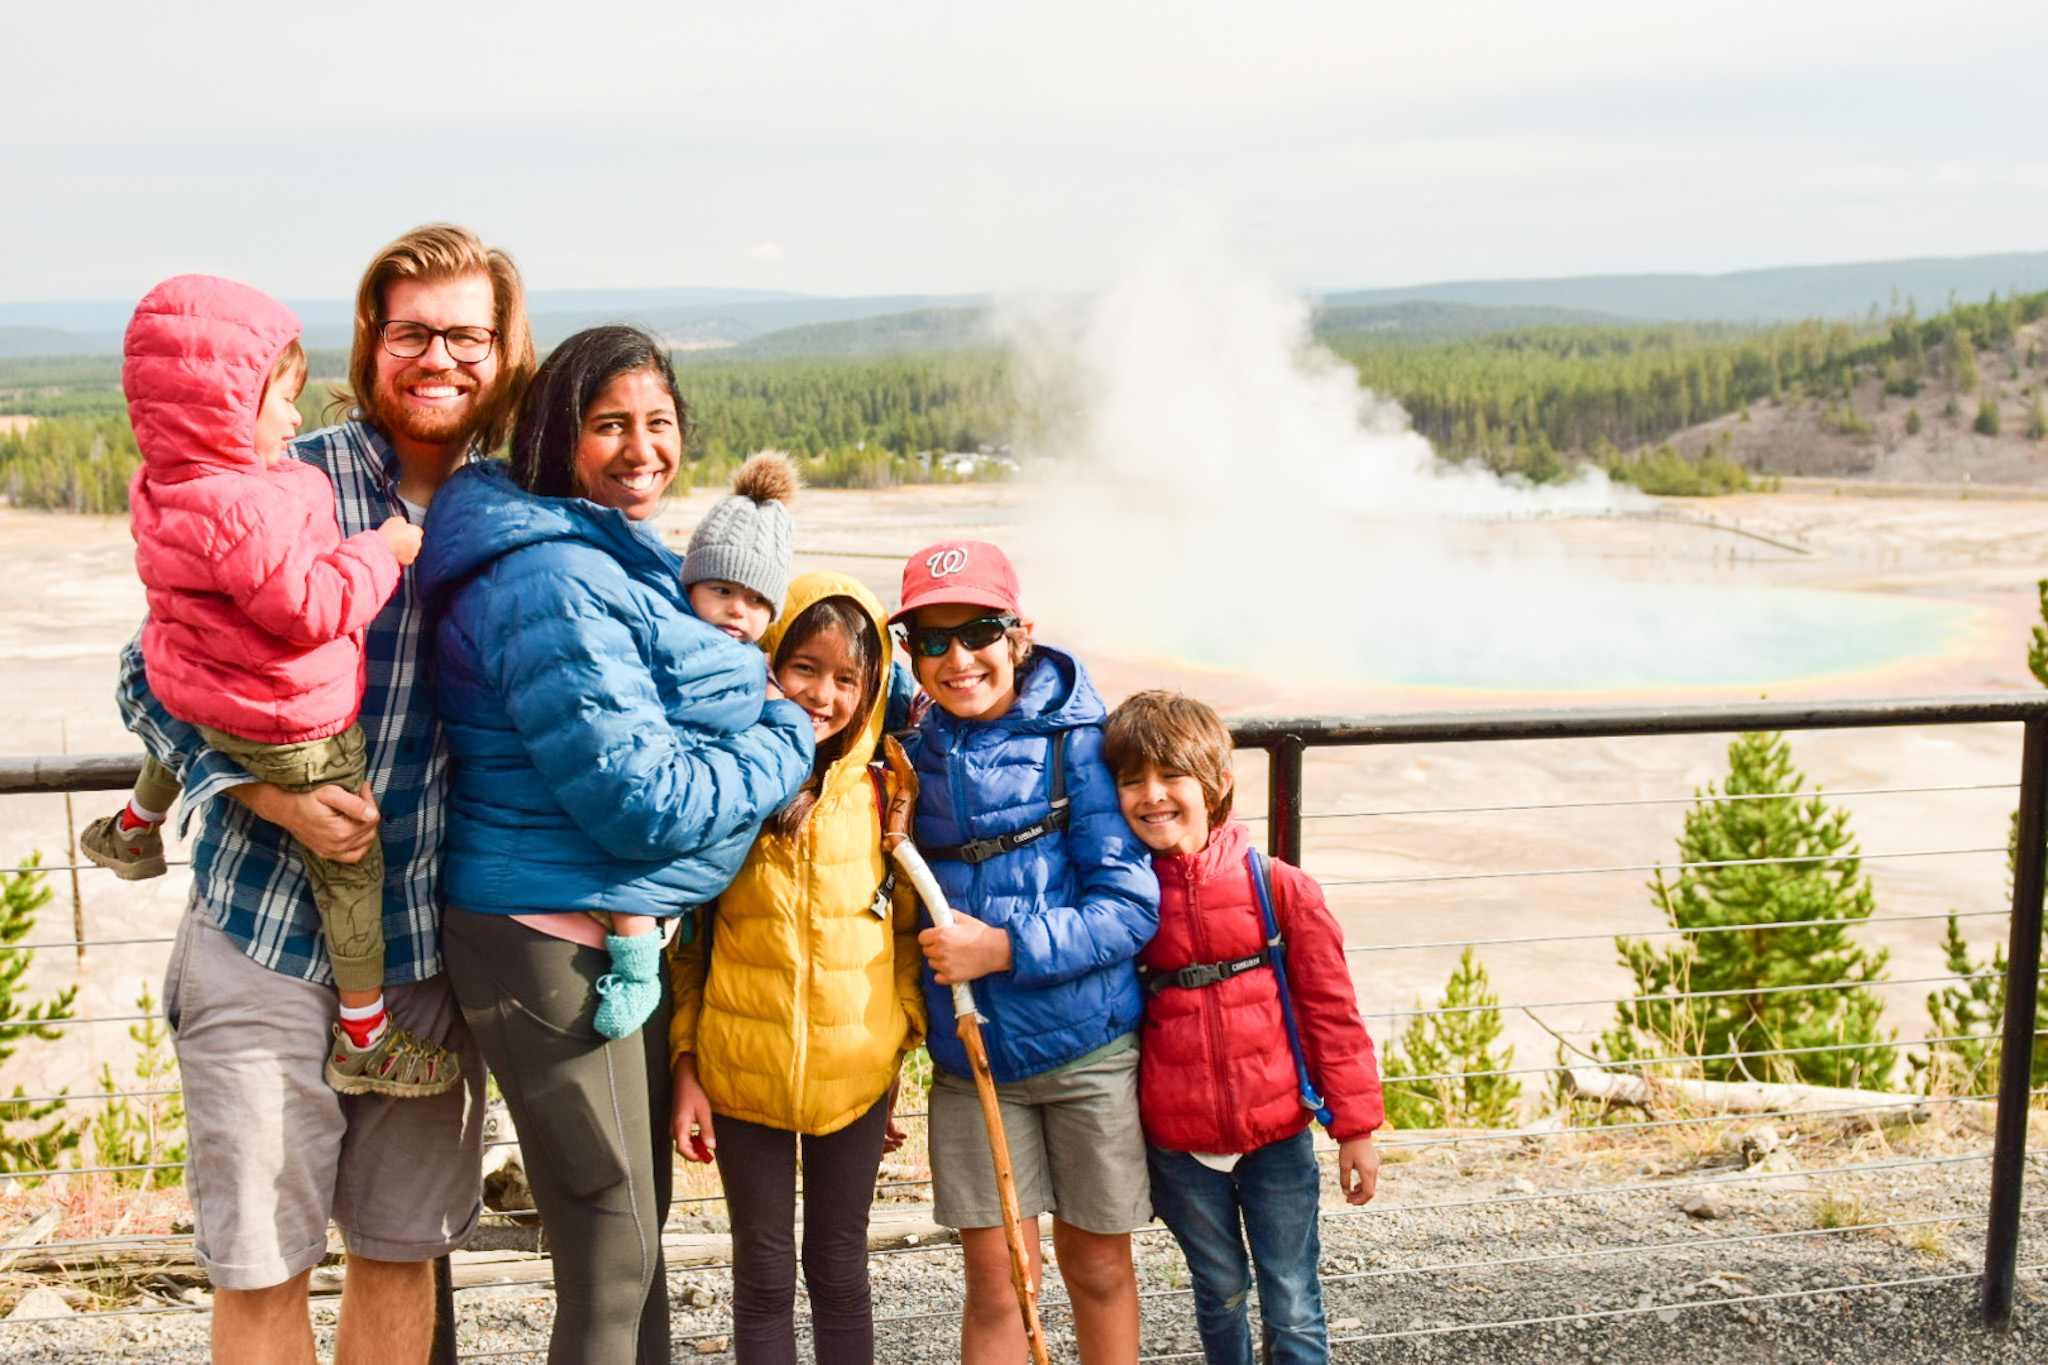 national park activities for families